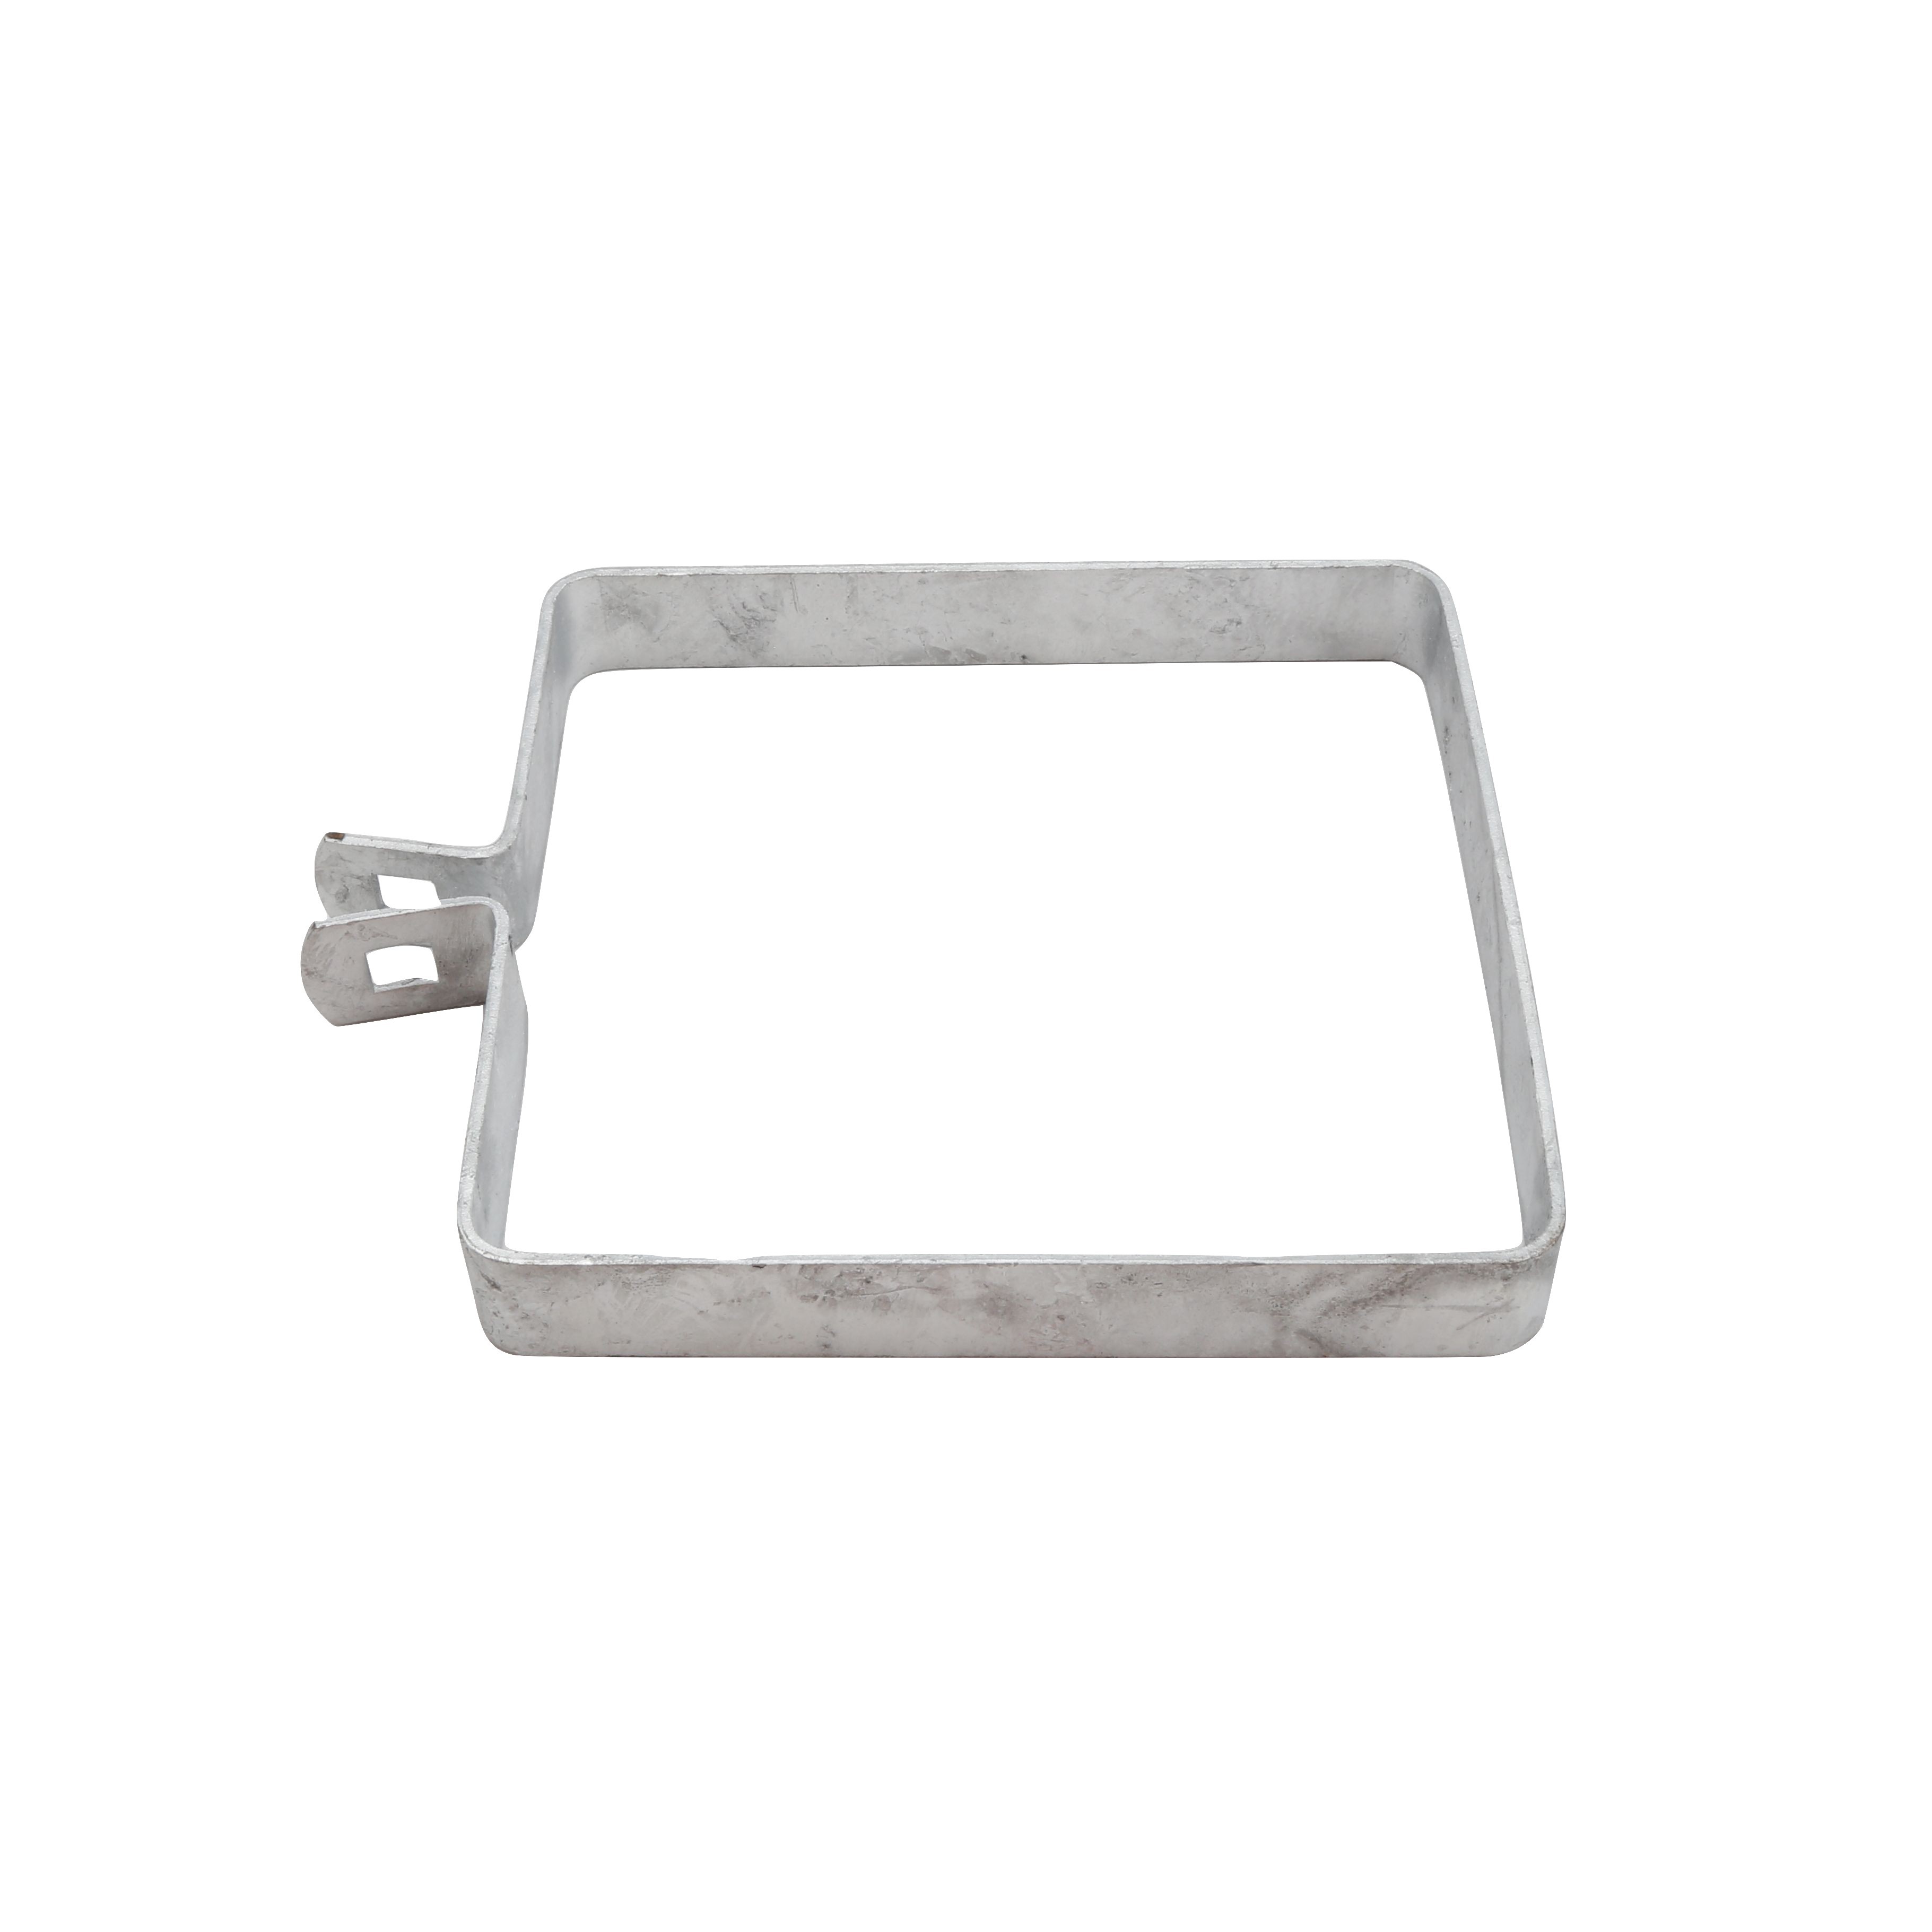 Cover Plate for Square Stainless Steel Terminal Posts